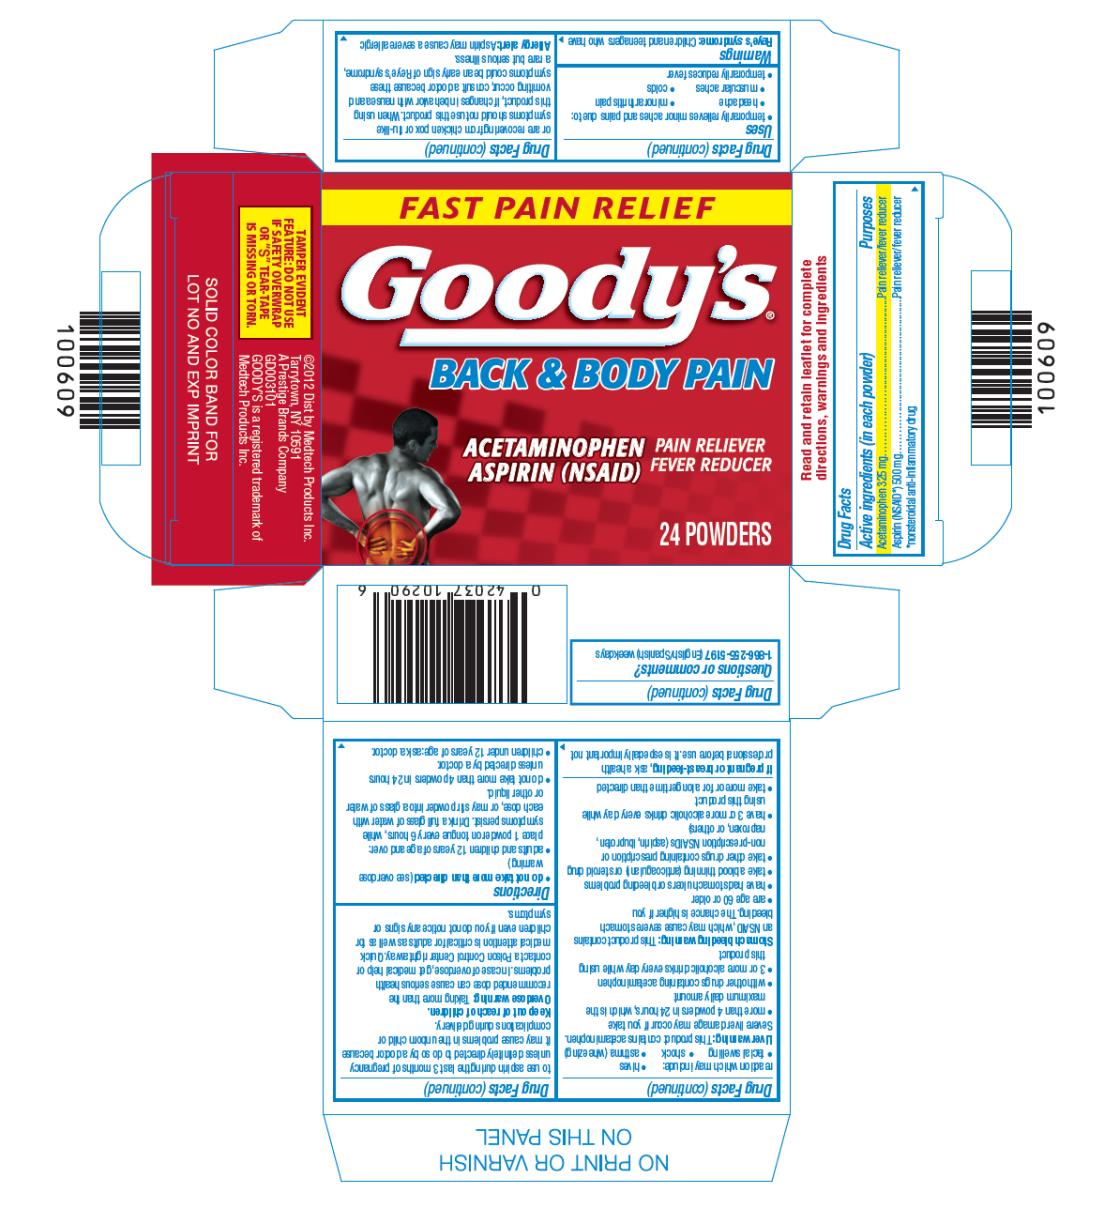 Goody’s BACK & BODY PAIN
Acetaminophen 
Aspirin (NSAID)
Pain Reliever
Fever Reducer
24 POWDERS
